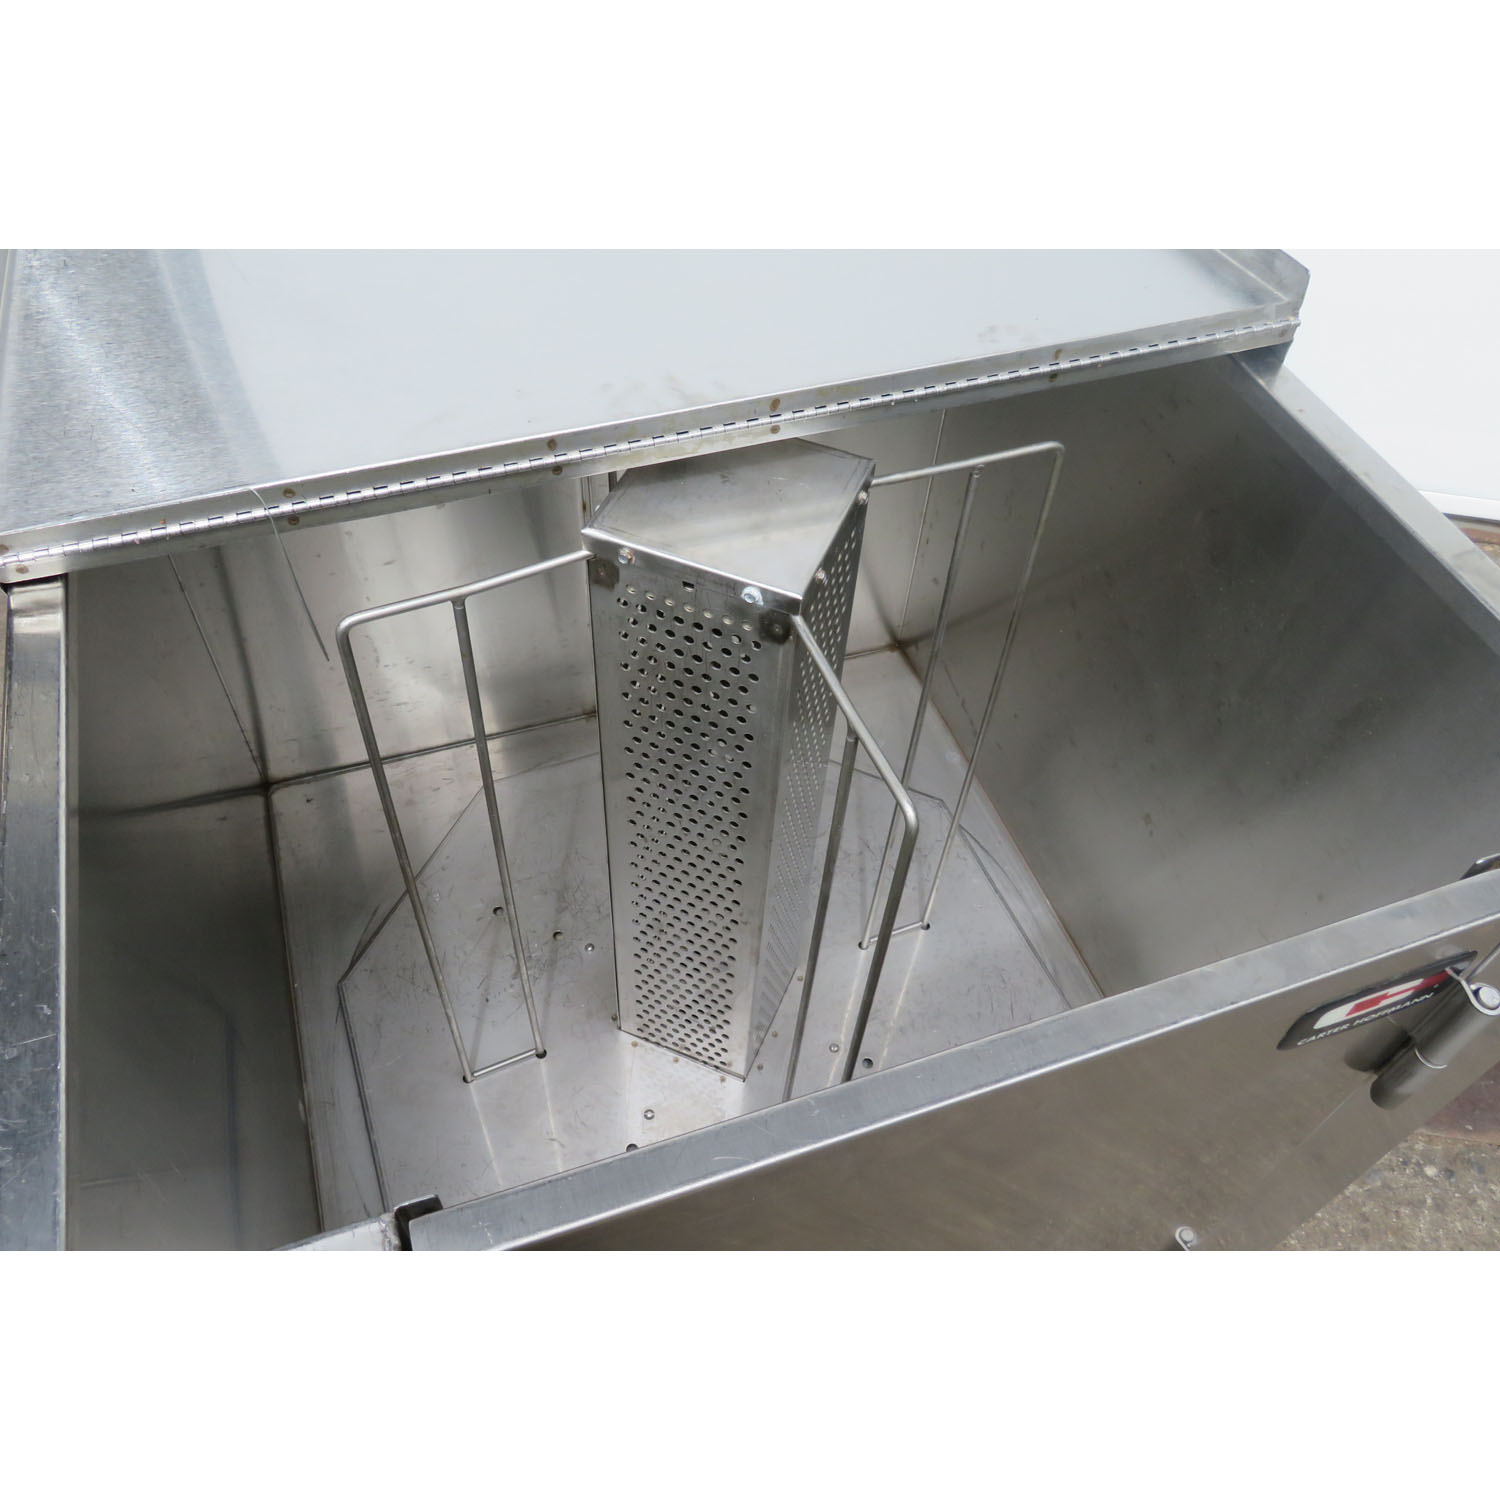 Carter-Hoffmann CD252H Mobile Heated Dish Cart, Used Great Condition image 1